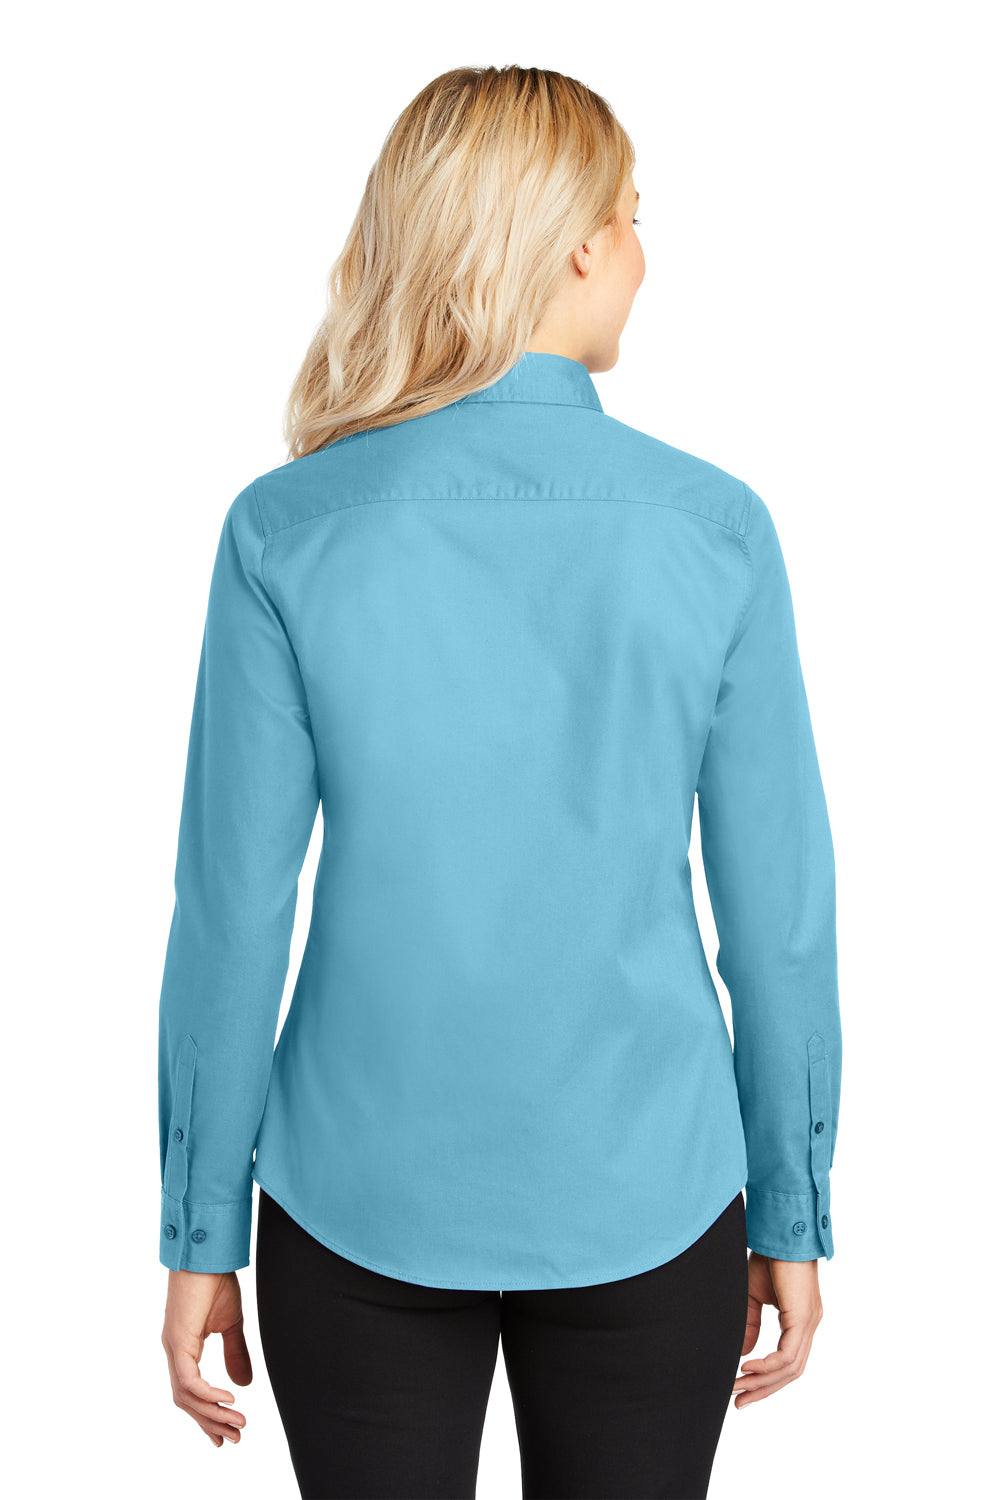 Port Authority L608 Womens Easy Care Wrinkle Resistant Long Sleeve Button Down Shirt Maui Blue Back